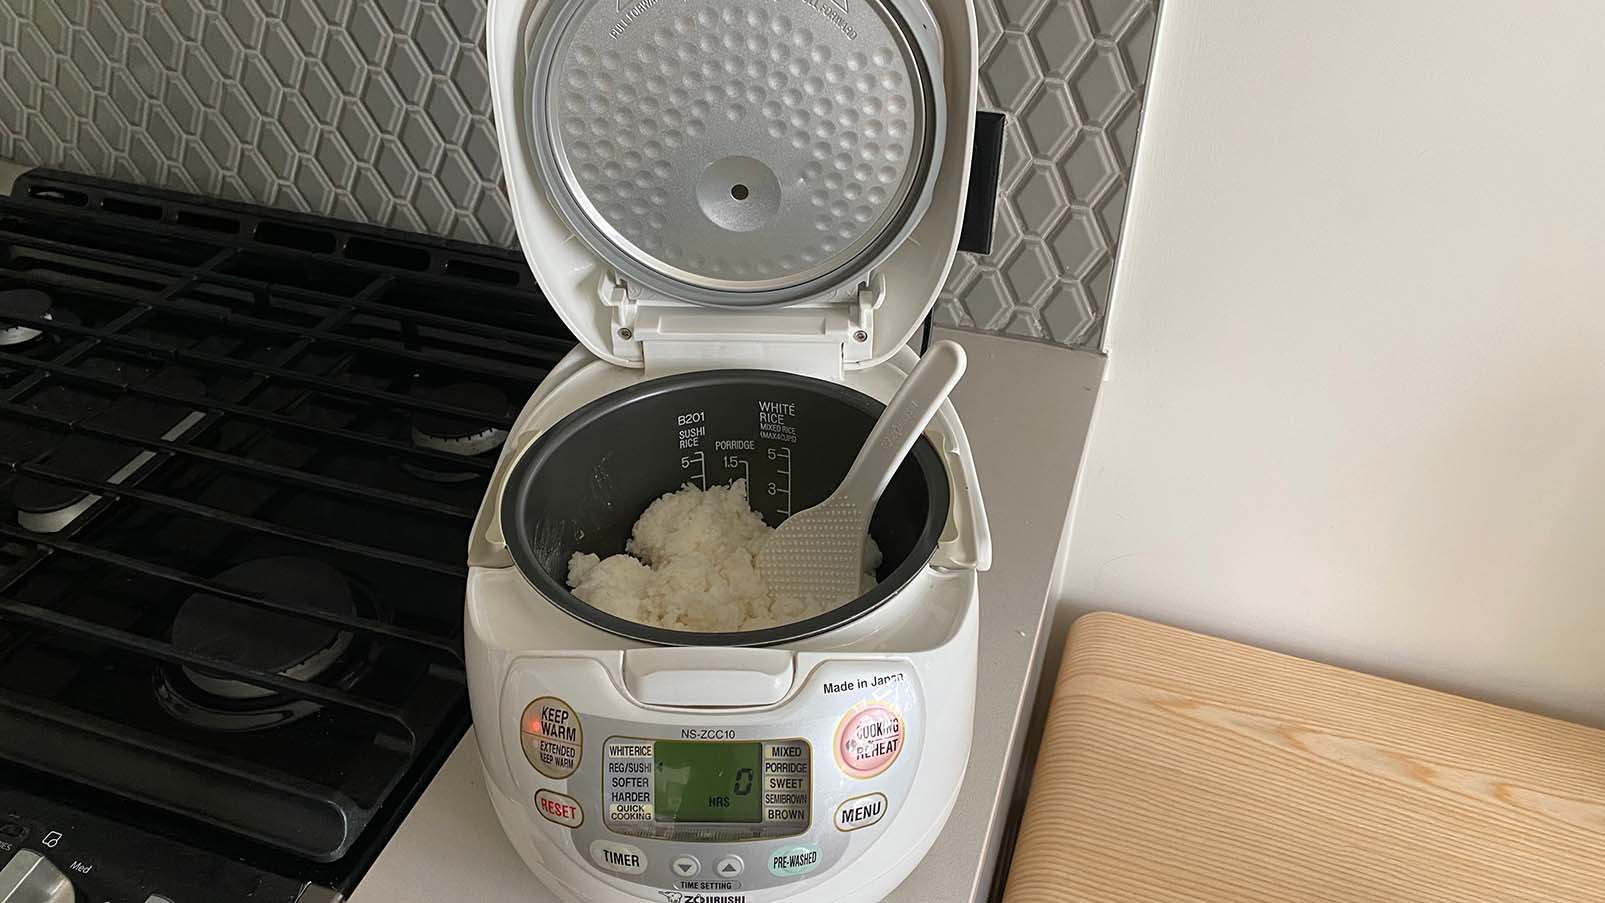 Best rice cookers in 2032, tested by our editors CNN Underscored